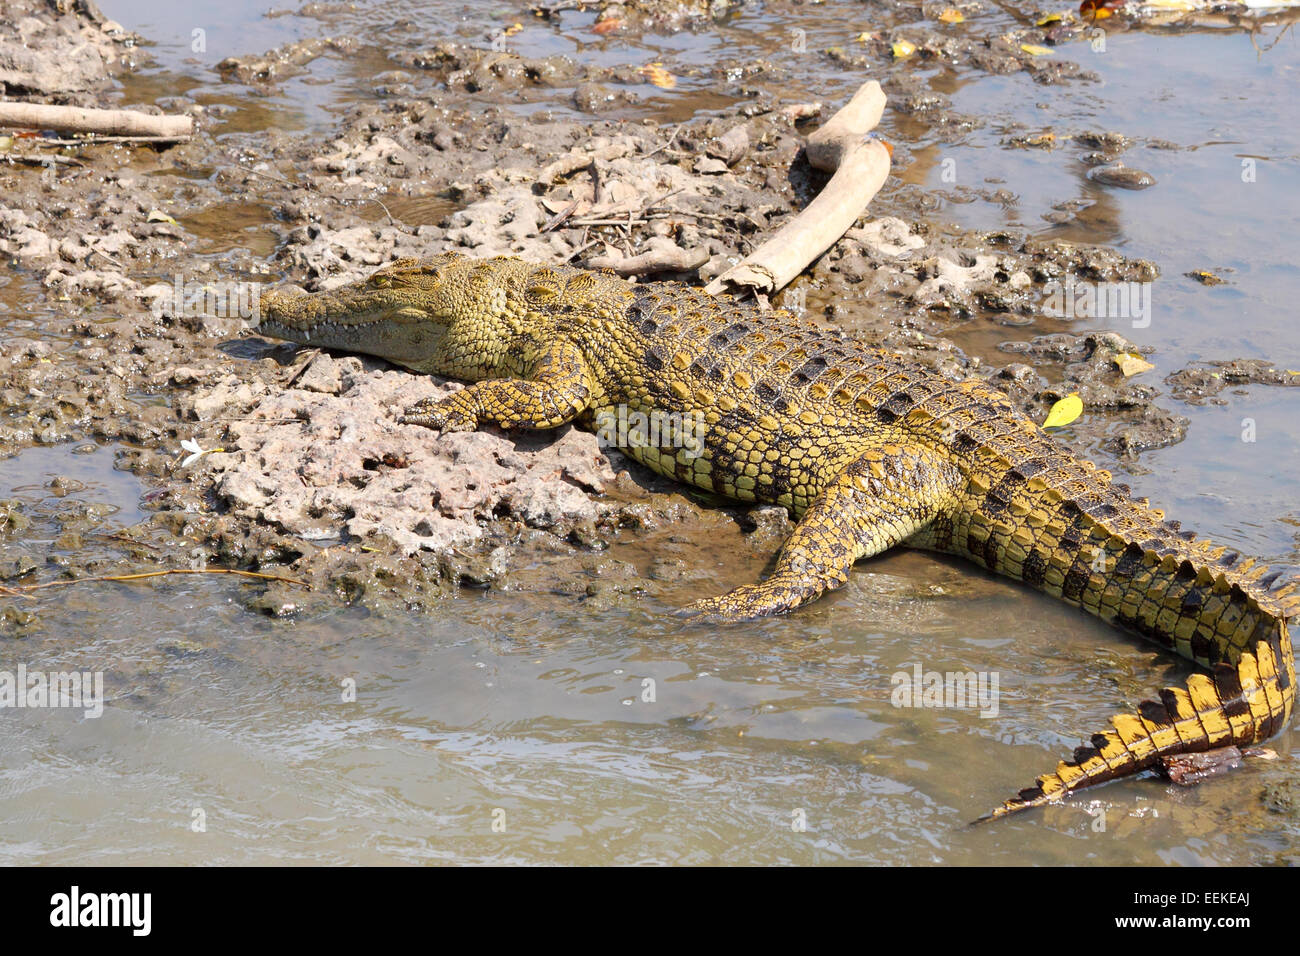 A young Nile Crocodile, Crocodylus niloticus, resting on the bank of a river in Serengeti National Park, Tanzania Stock Photo